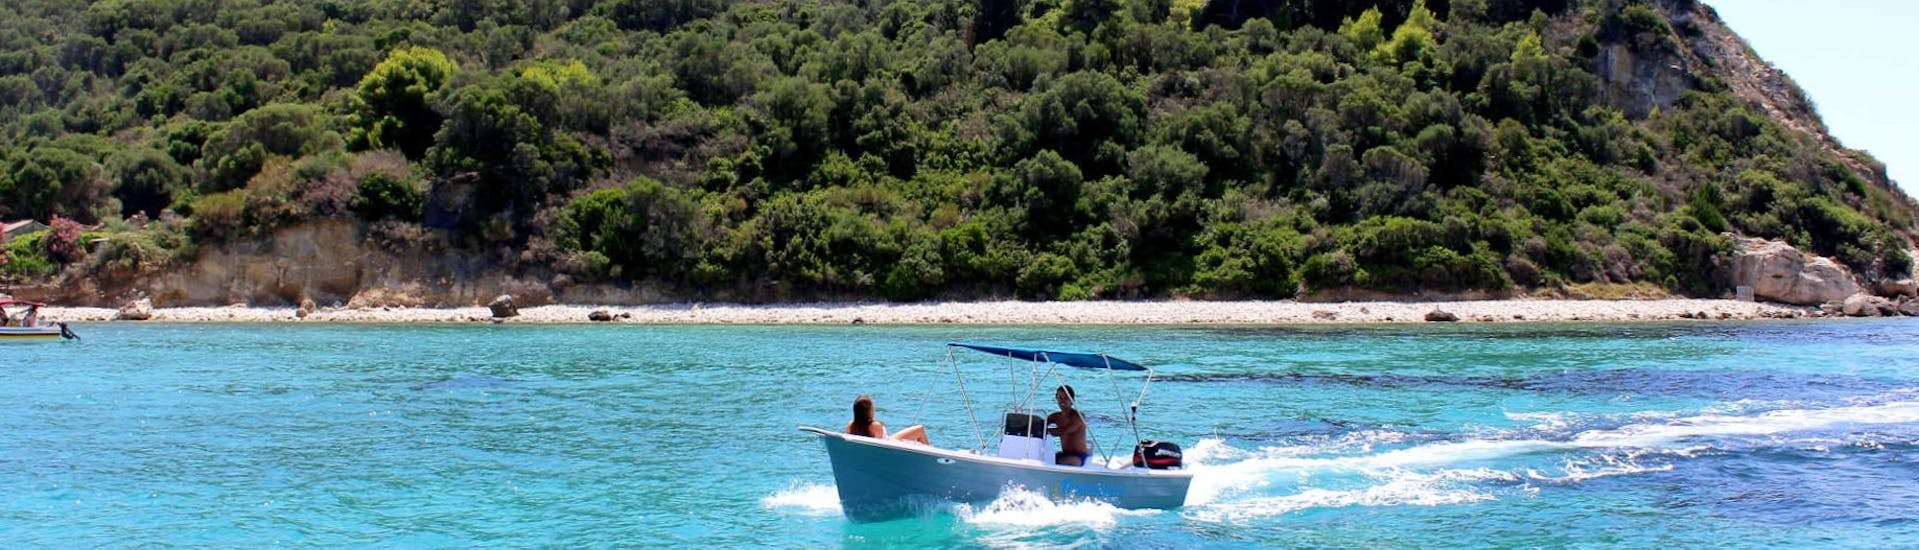 The boat that can be rented at the boat rental in Agios Sostis - Premium with Traventure Zakynthos is located on the beach.